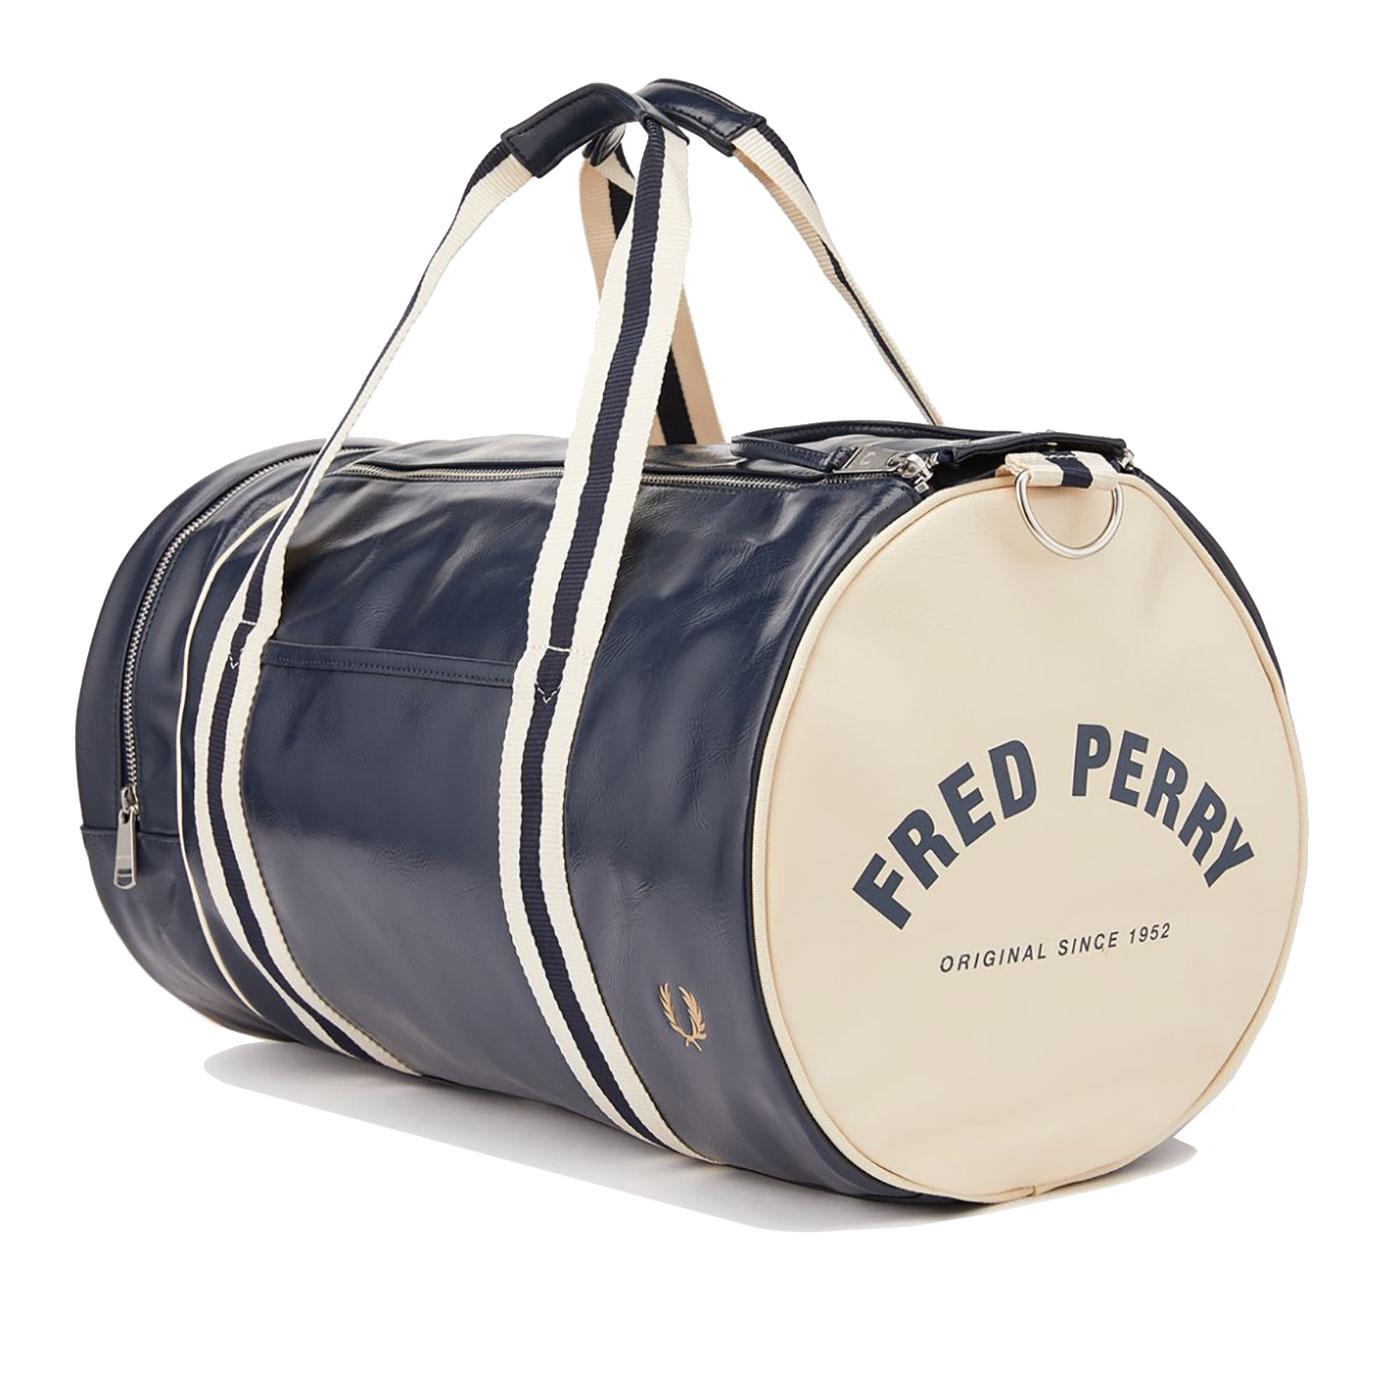 FRED PERRY Retro Mod Classic PU Barrel Bag in Navy